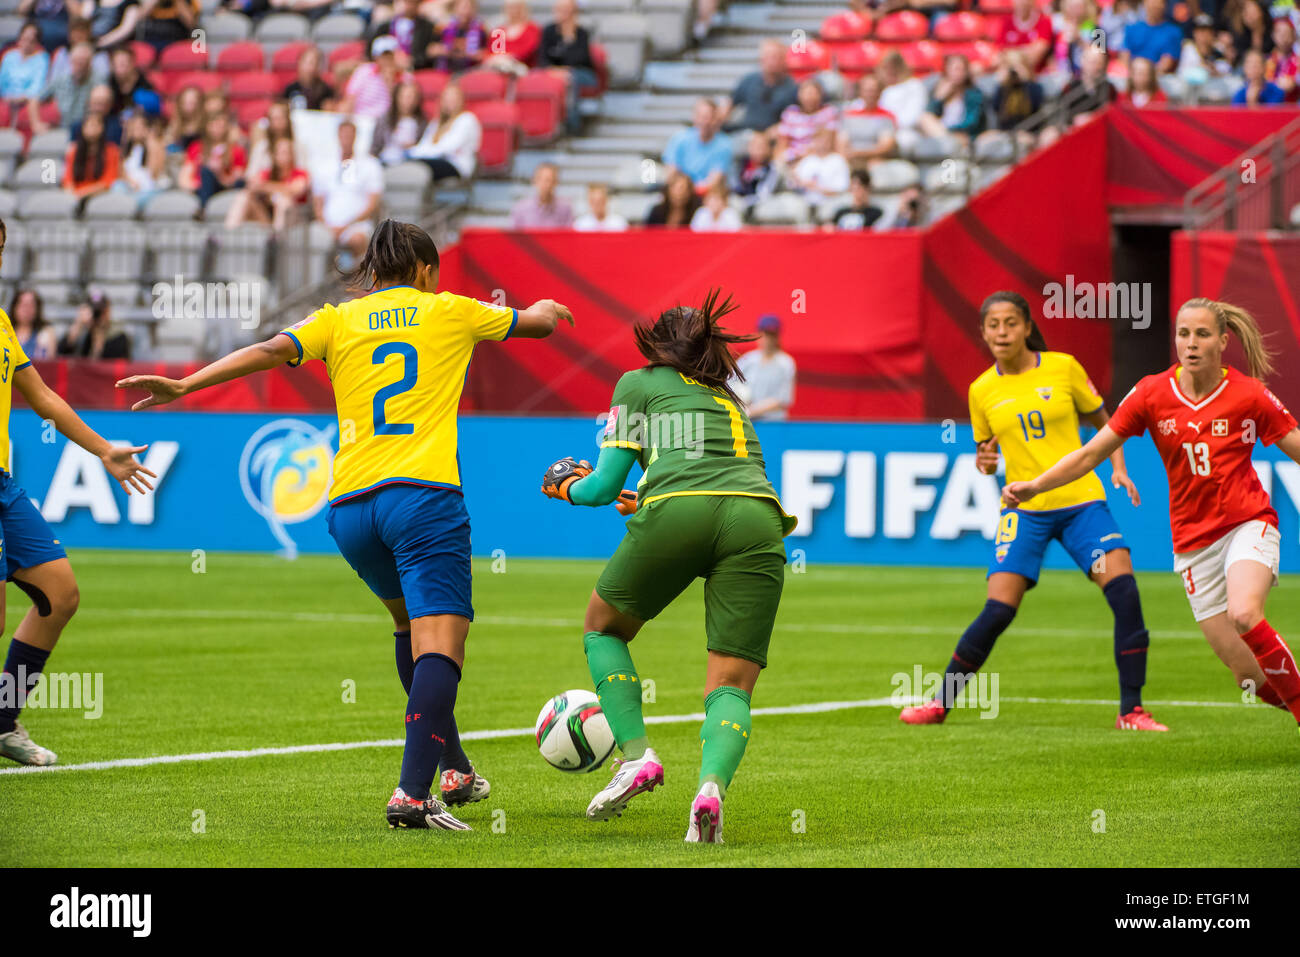 Vancouver, Canada - June 12, 2015: Ecuador goalkeeper Shirley BERRUZ (#1) dives after the ball during the opening round match between Switzerland and Ecuador of the FIFA Women's World Cup Canada 2015 at BC Place Stadium. Switzerland won the match 10-1. Stock Photo